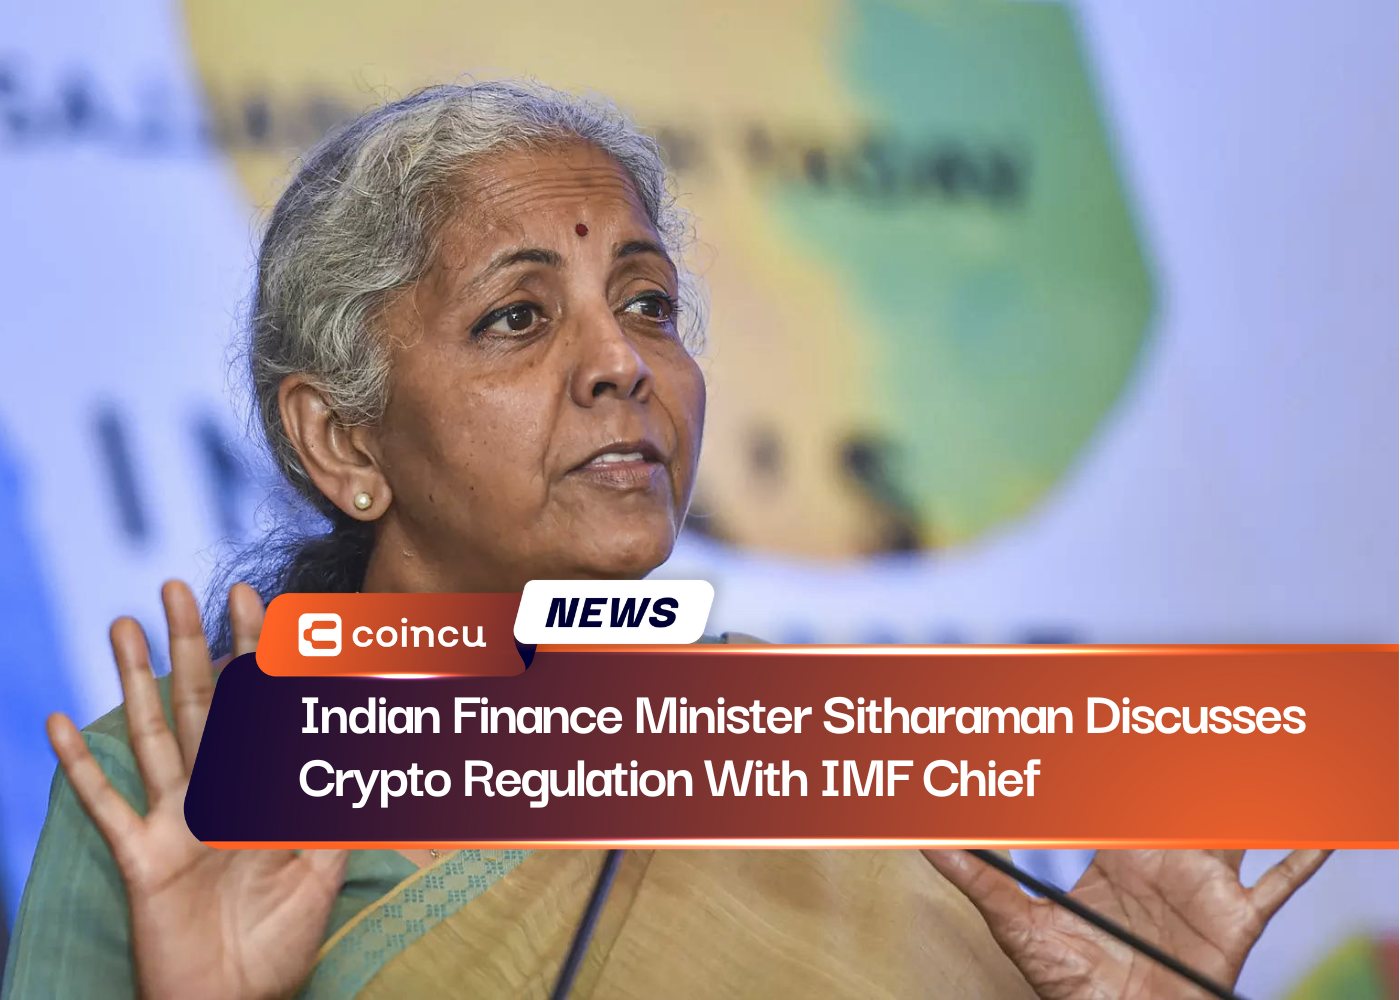 Indian Finance Minister Sitharaman Discusses Crypto Regulation With IMF Chief